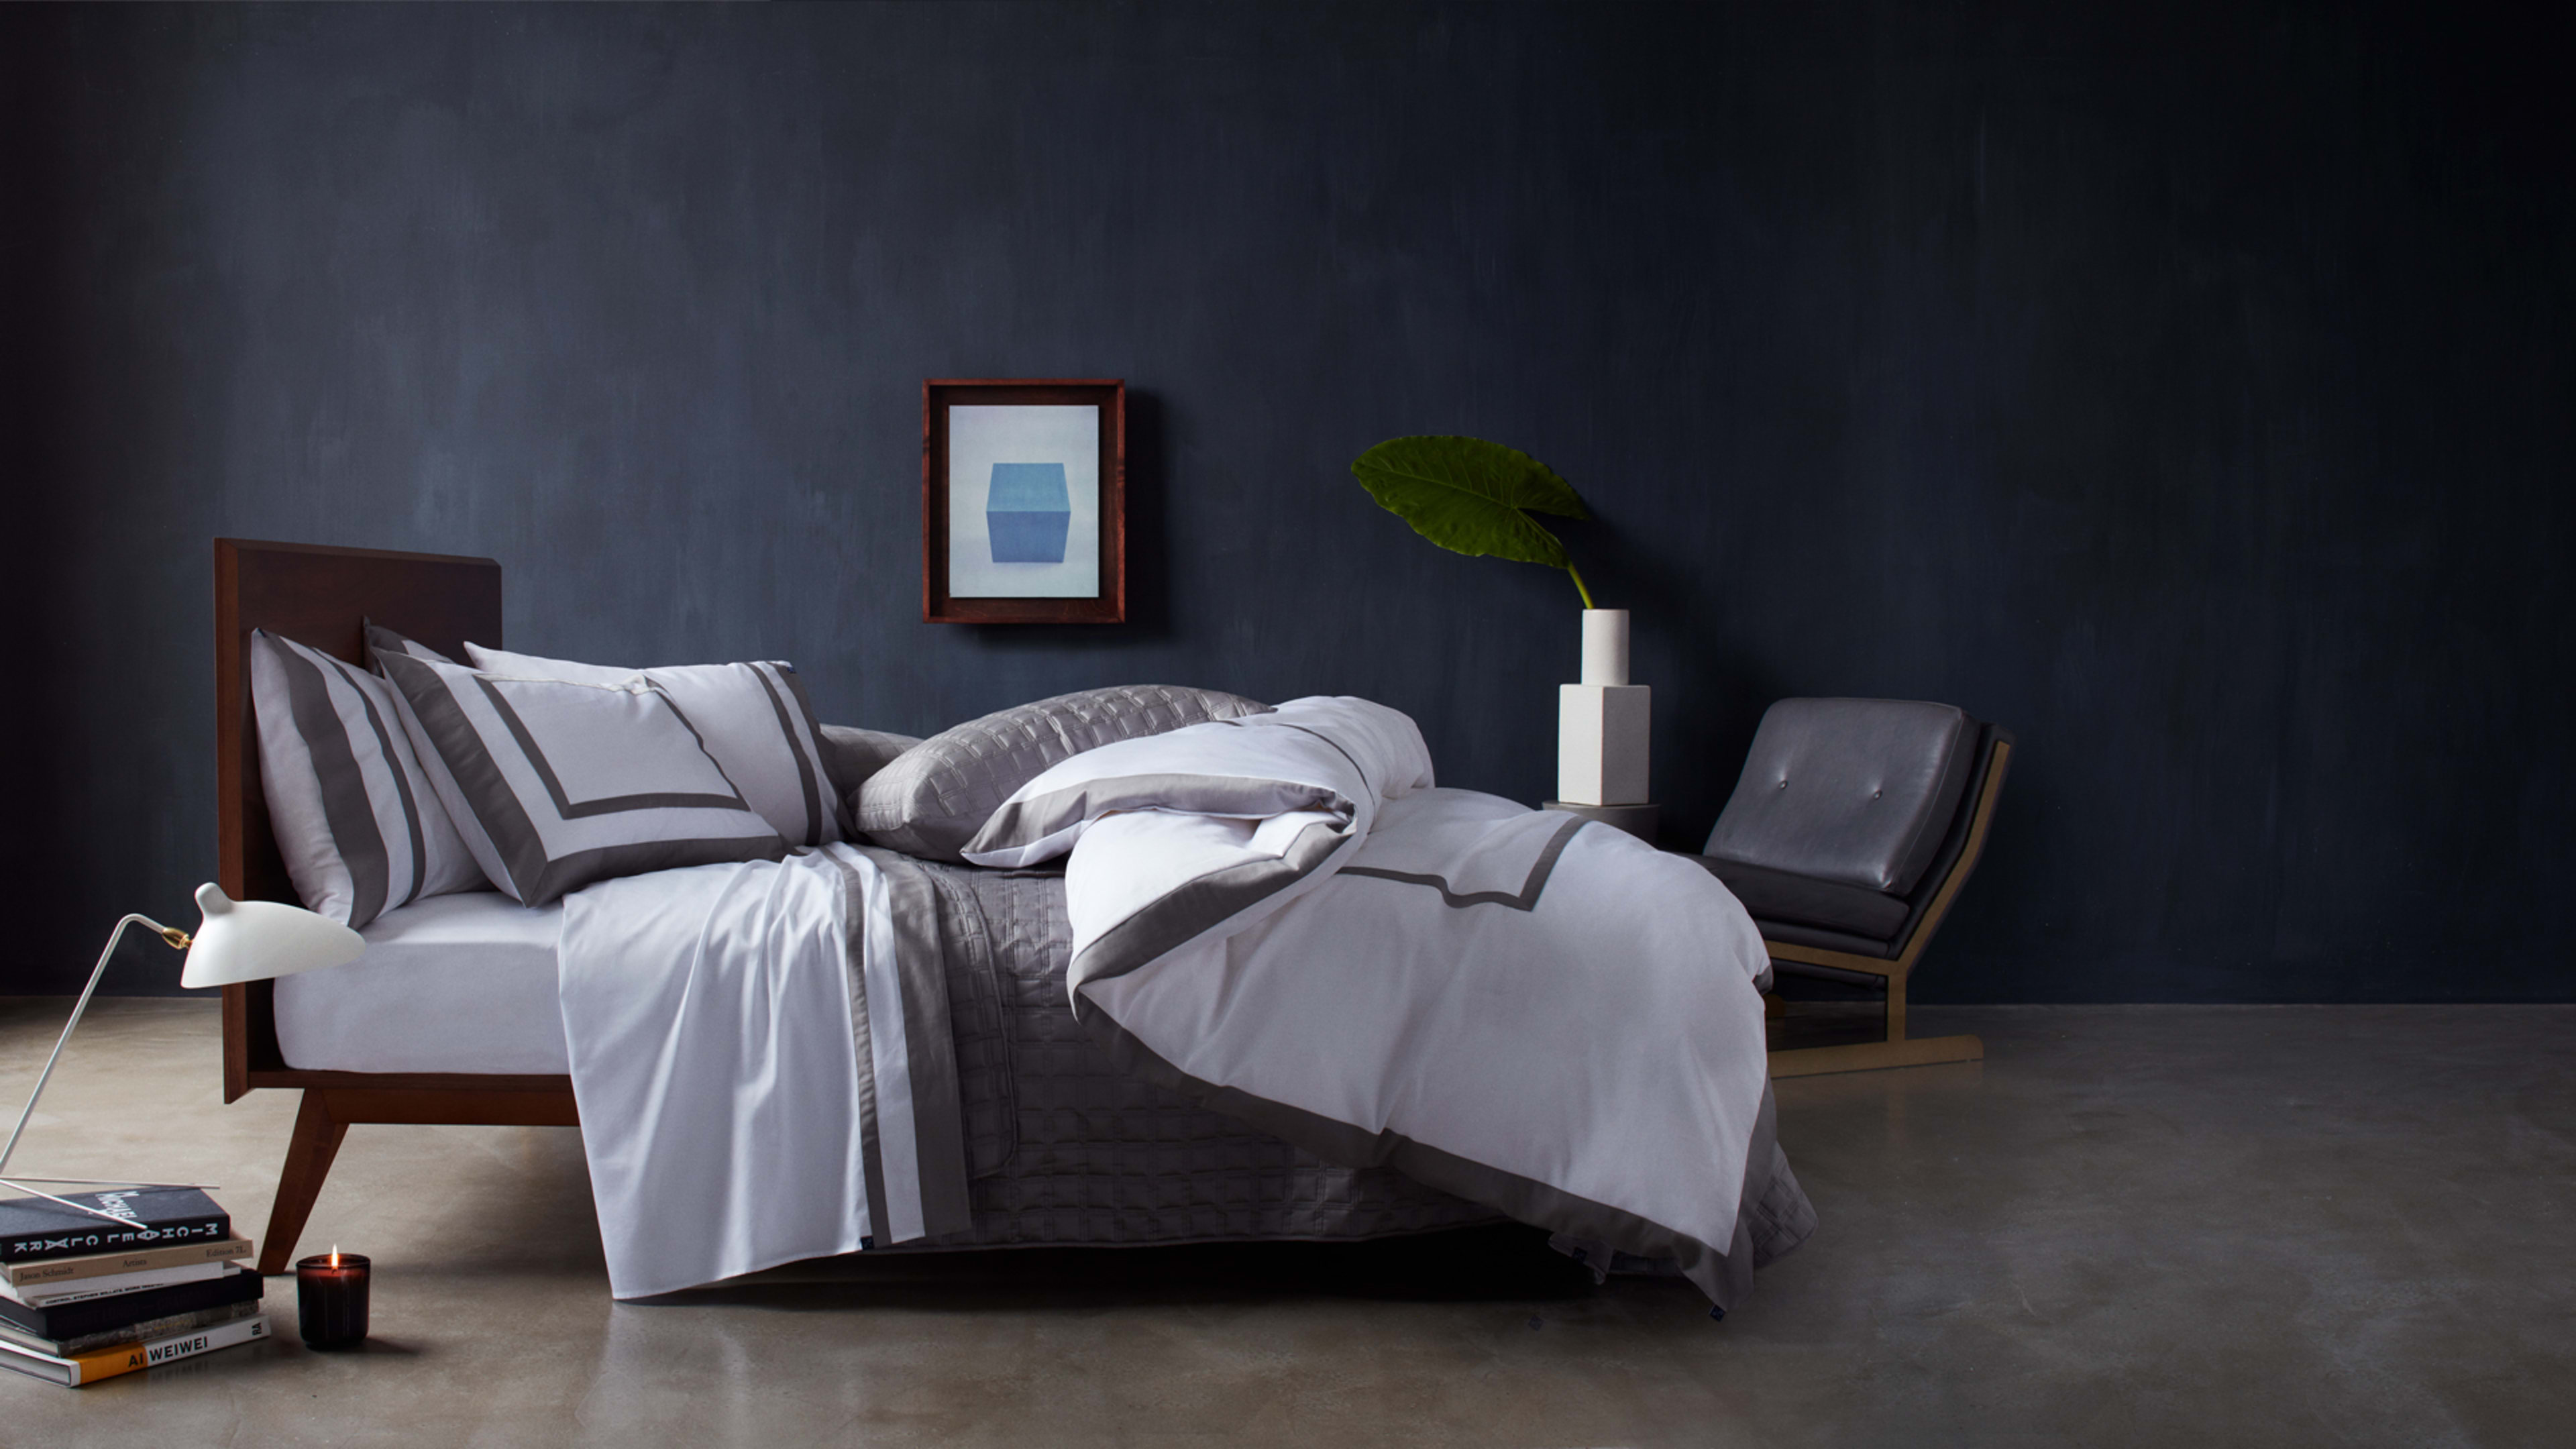 Brooklinen and Parachute have a formidable new competitor in the luxury bedsheet wars